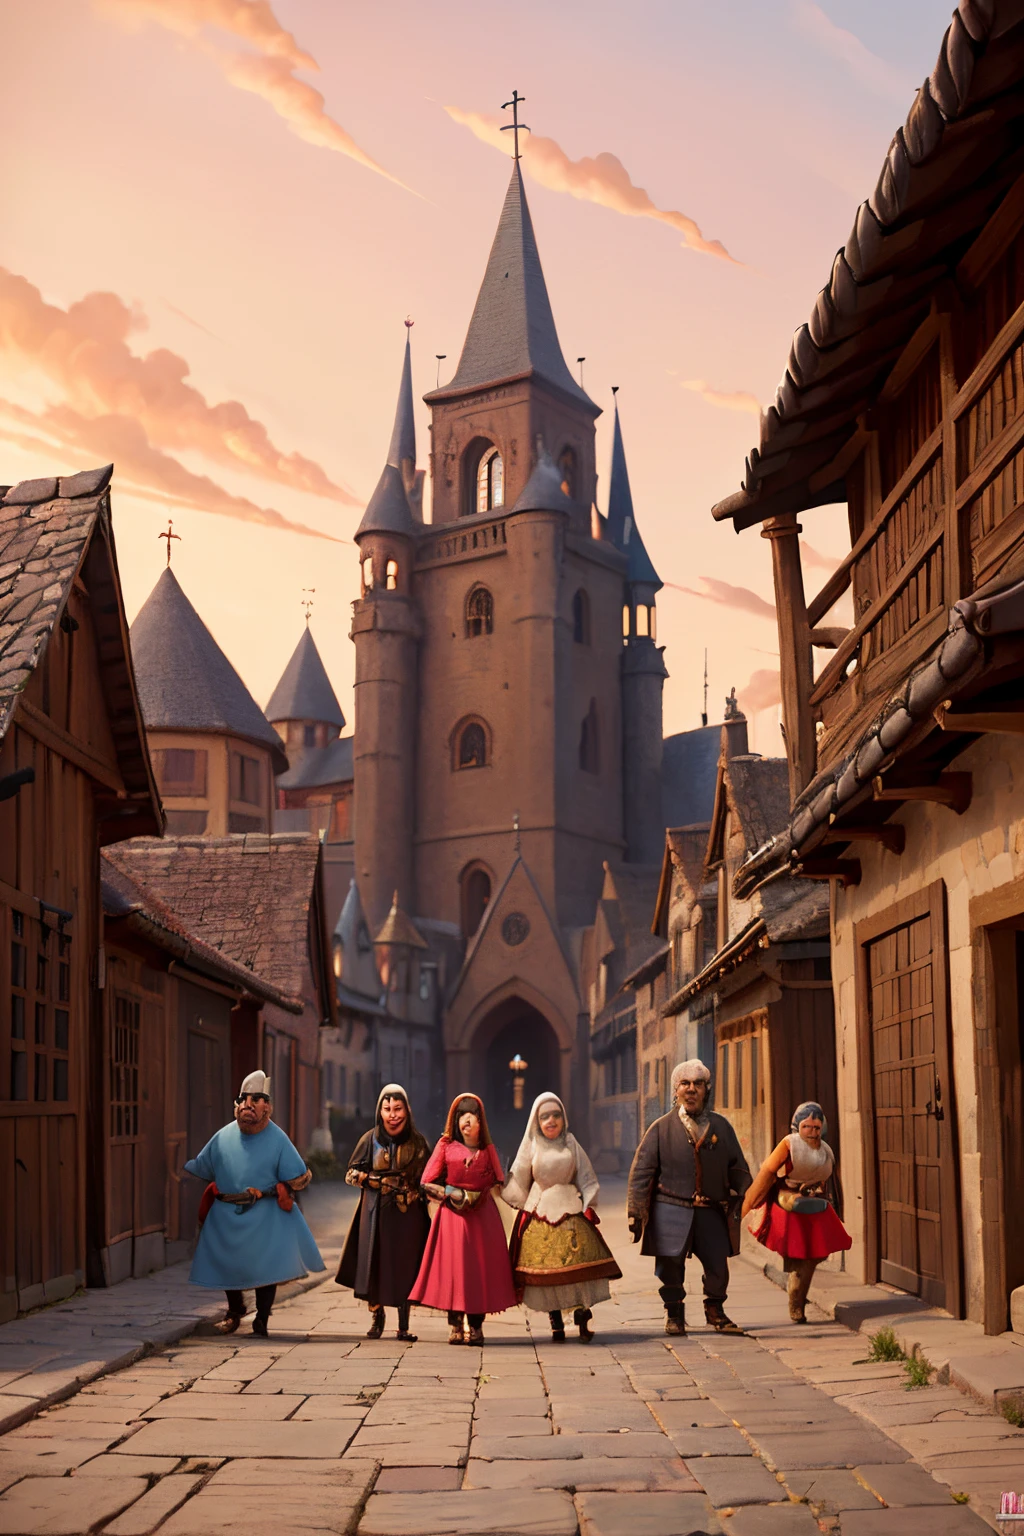 Some dark fantastic beings ,walking down a big street, on a medieval street with houses around, many people in medieval clothes walking down the street. Style pixar